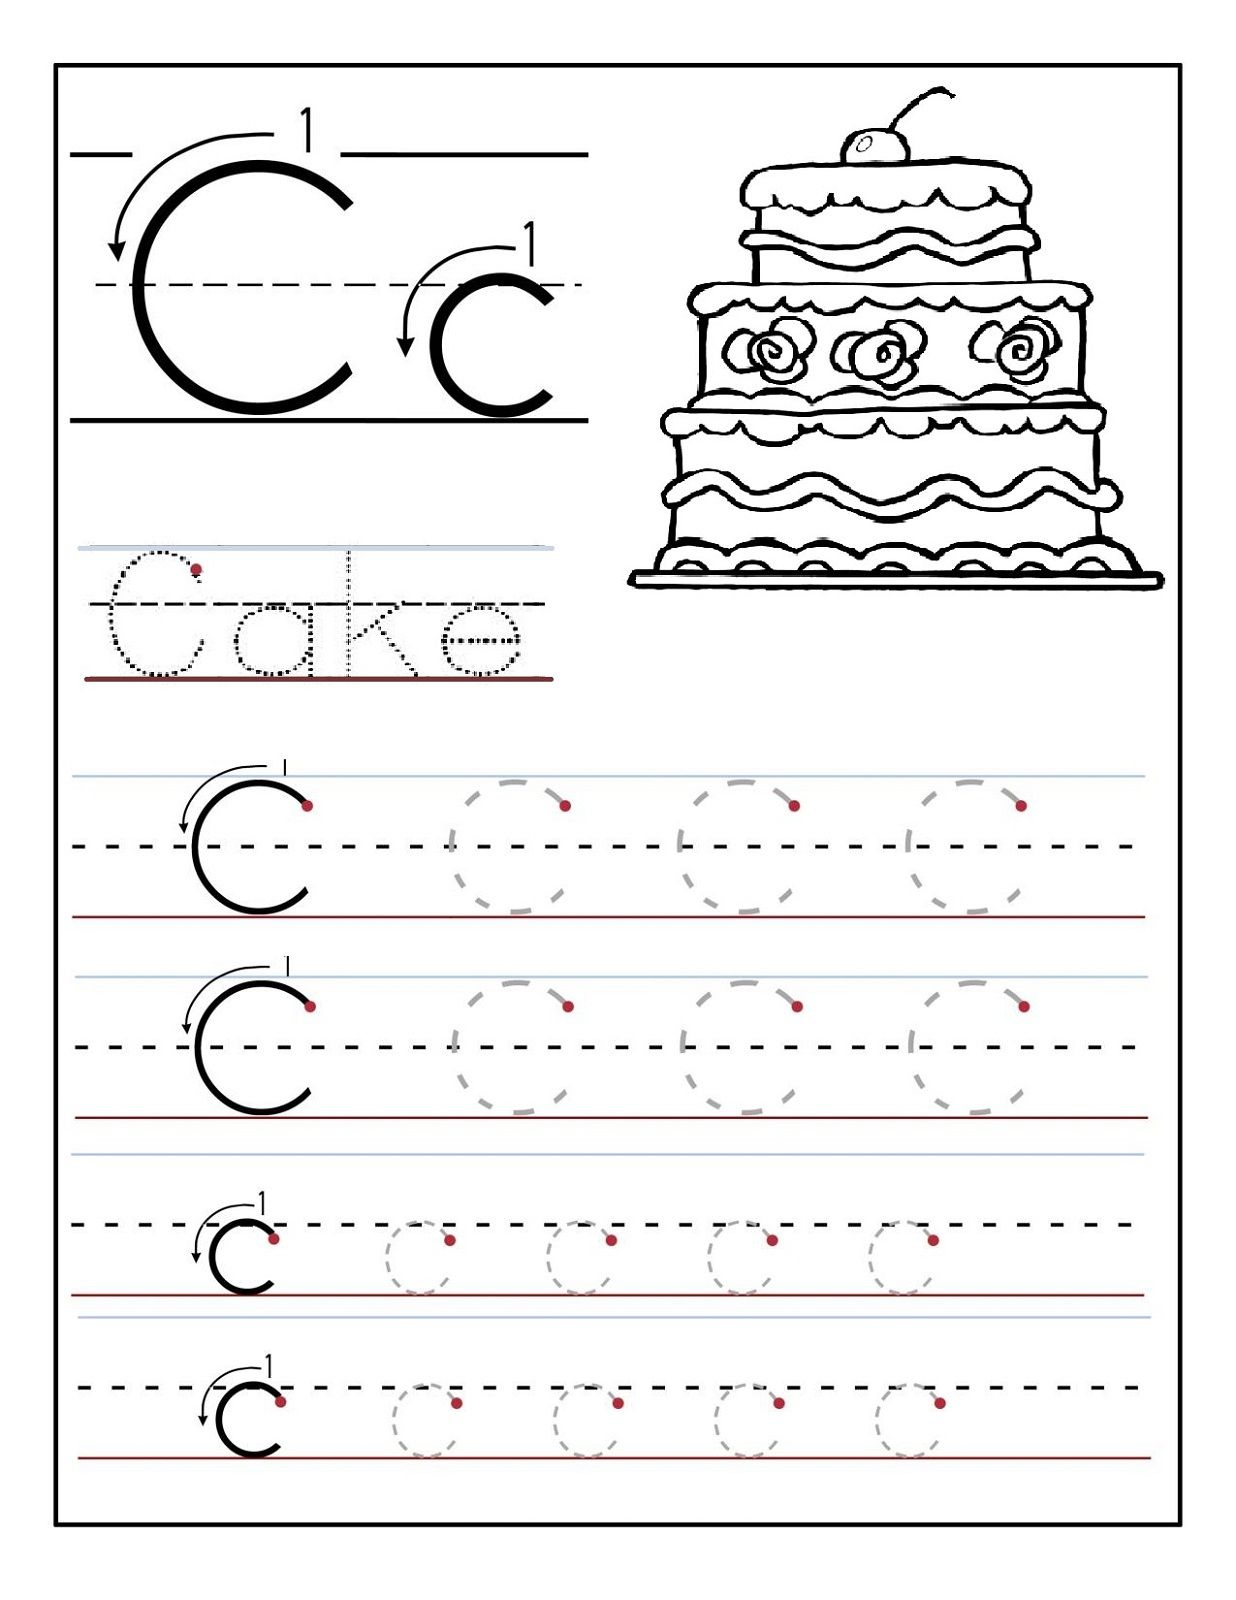 Trace The Letter C Worksheets | Preschool Worksheets, Letter inside Letter C Worksheets Pdf